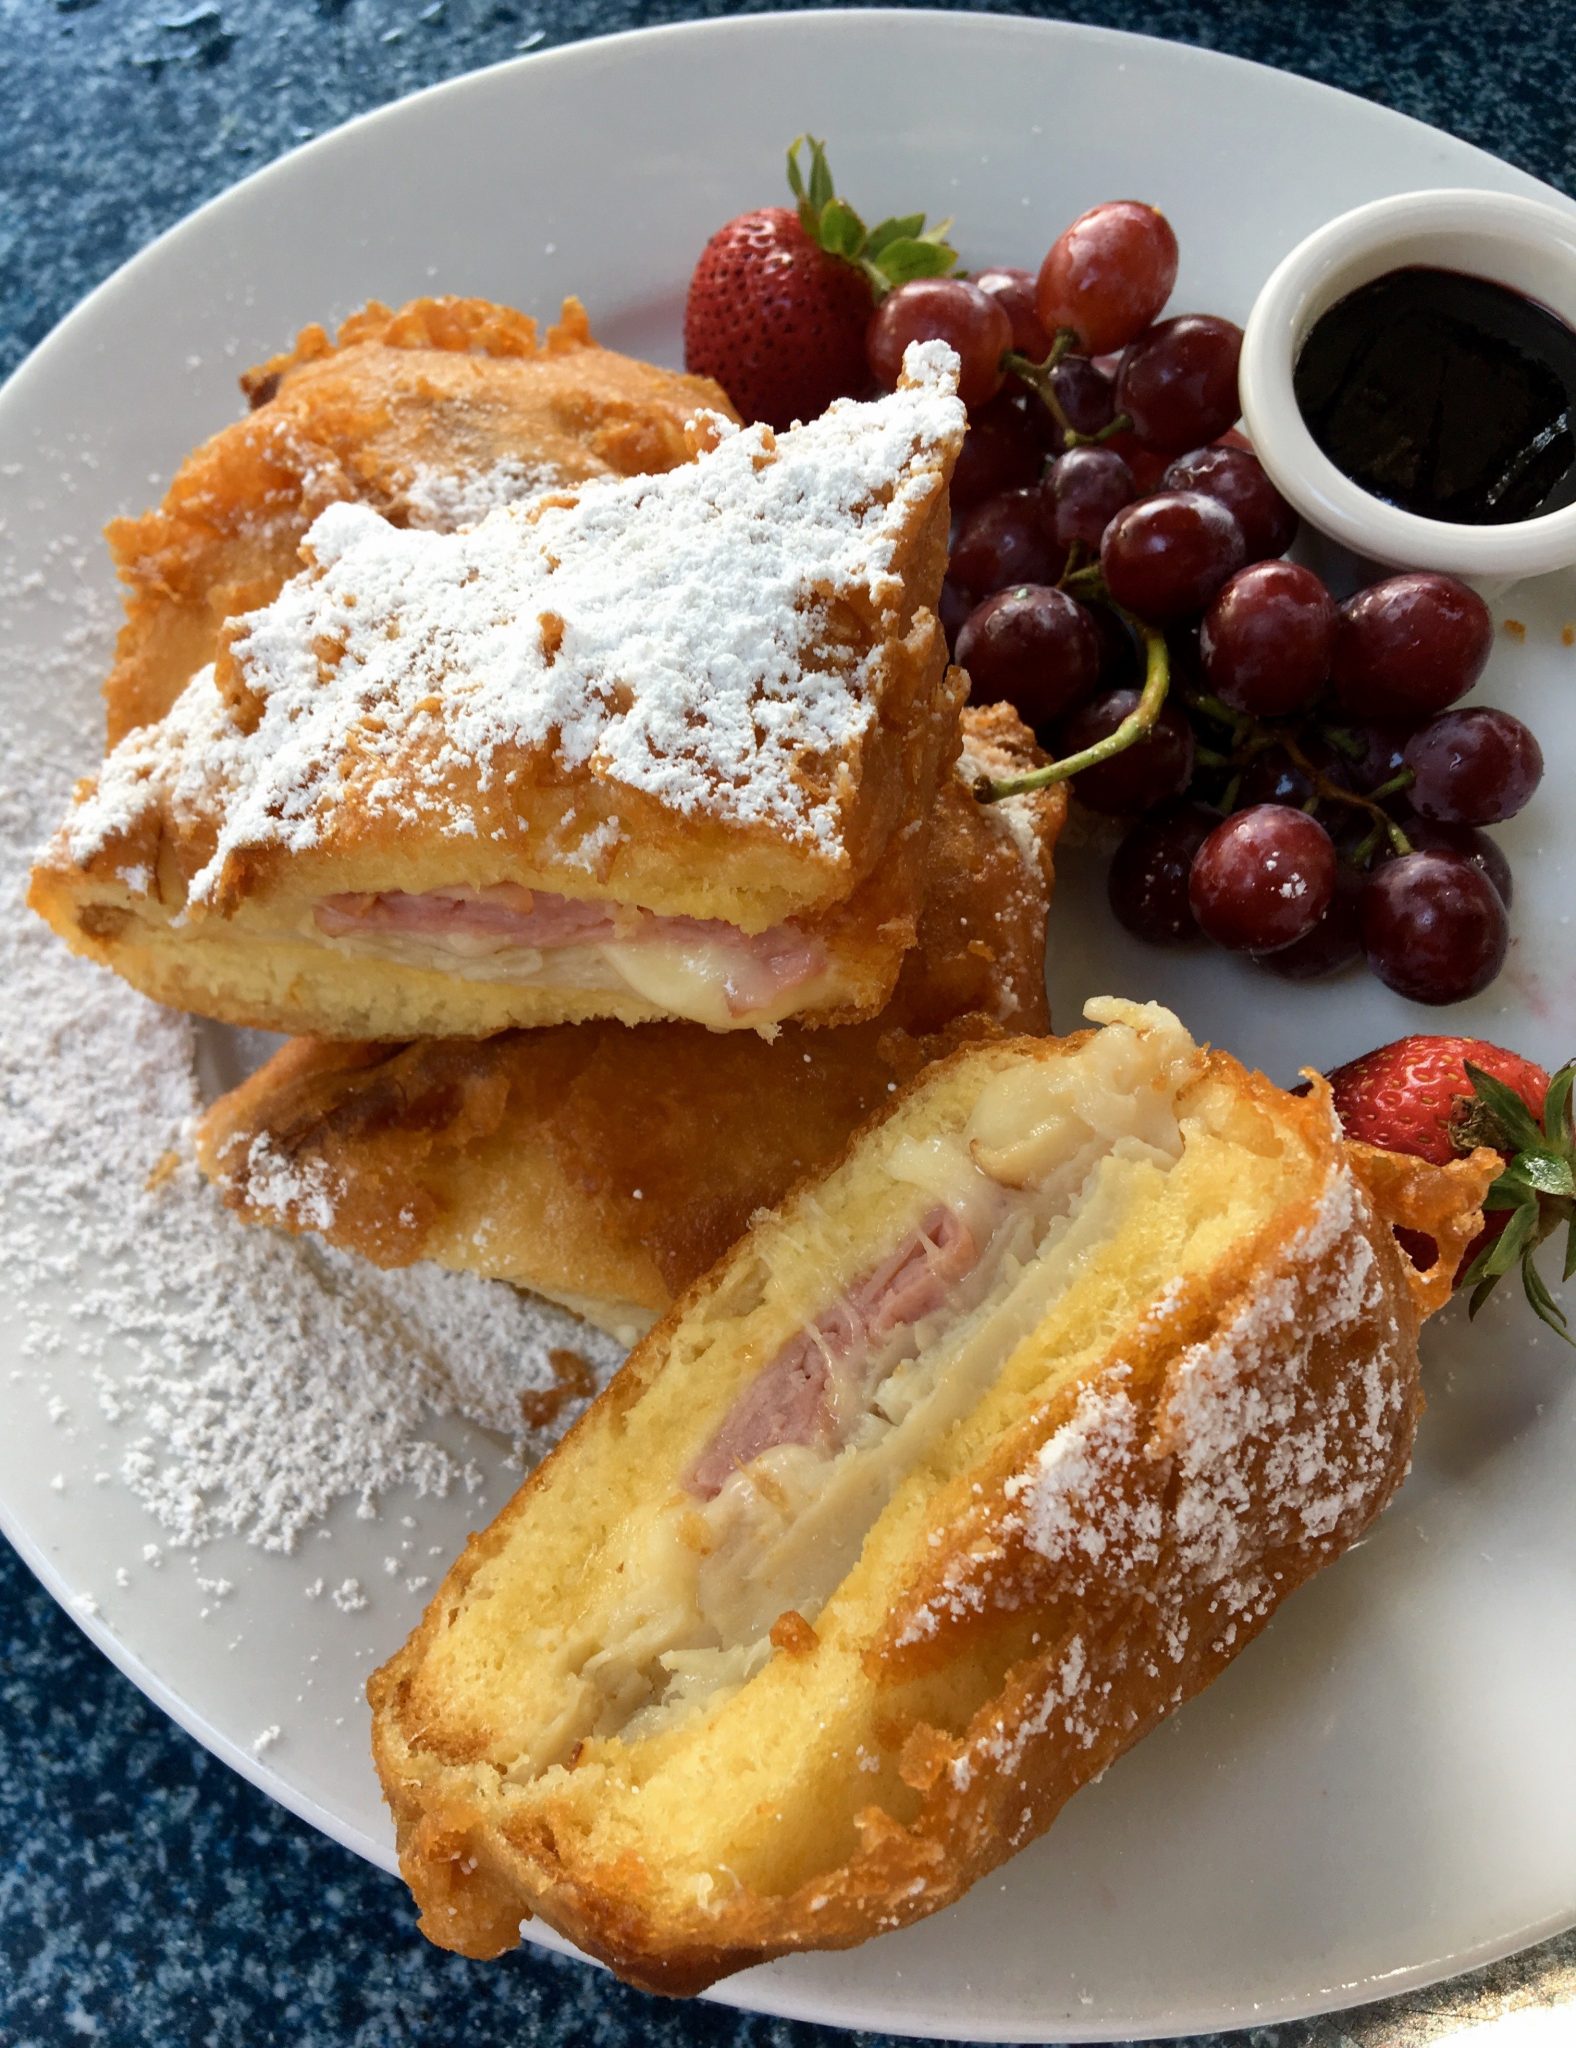 Experience A Taste of the French Quarter at Cafe Orleans